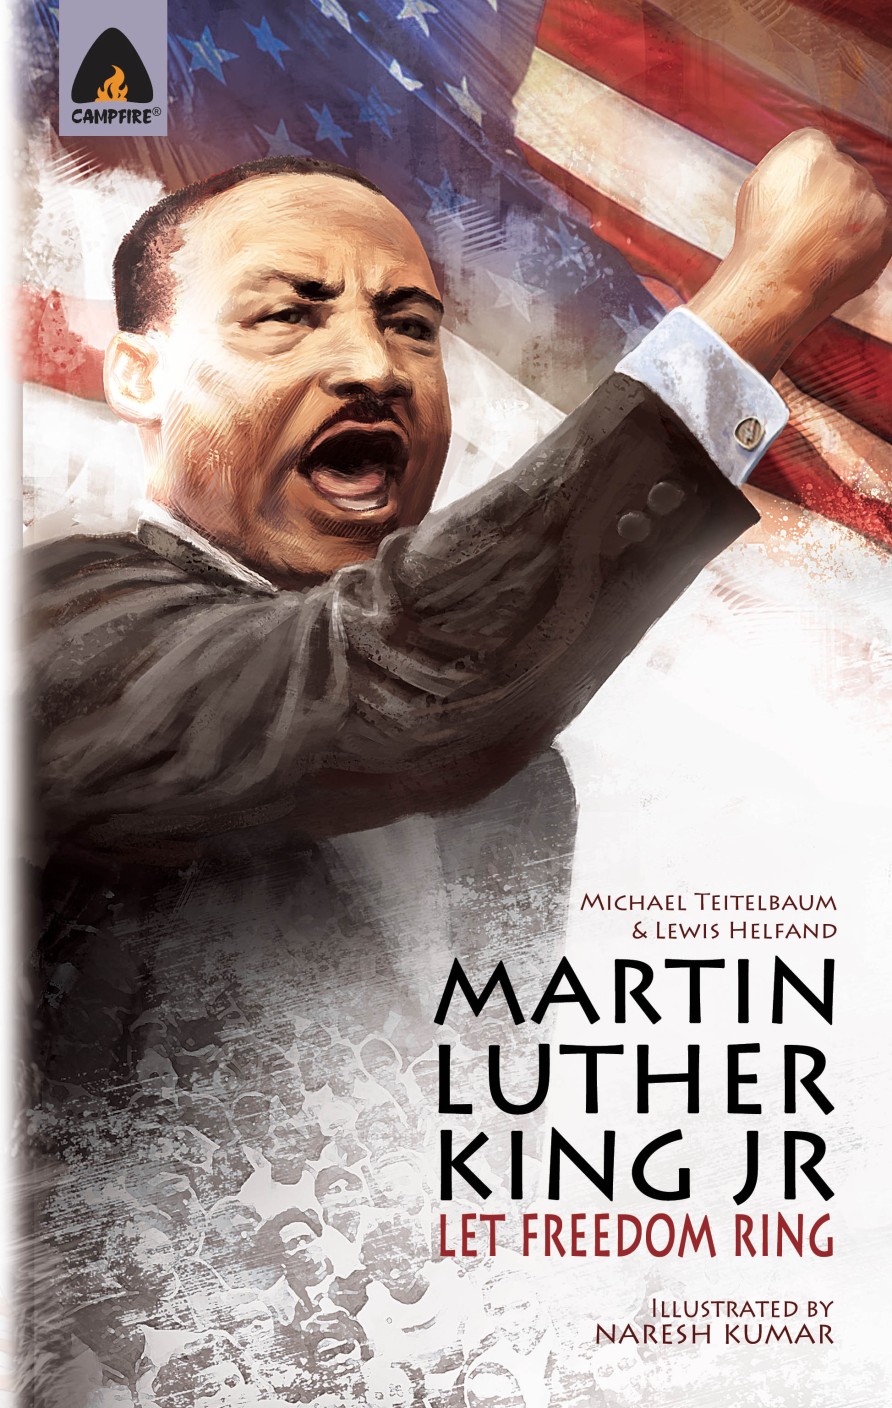 MARTIN LUTHER KING JR LET FREEDOM RING - Buy MARTIN LUTHER KING JR LET ...